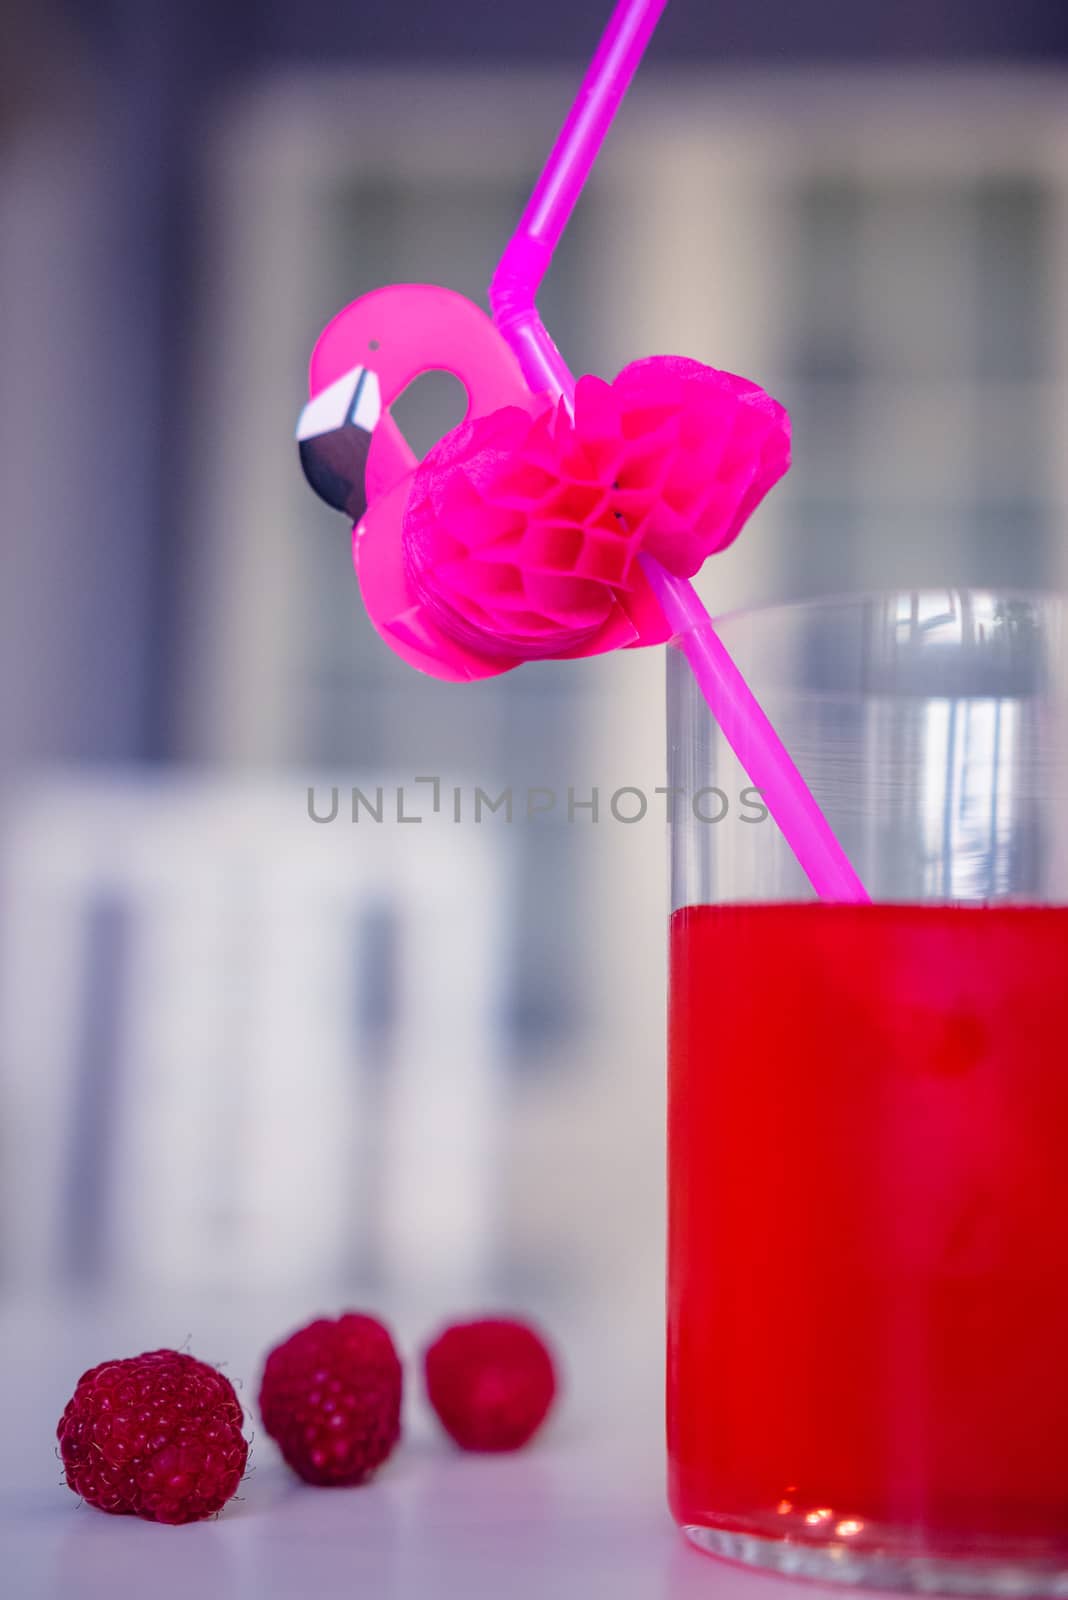 drink red with decorative drinking tube decorated with Flamingo figure by alexandr_sorokin